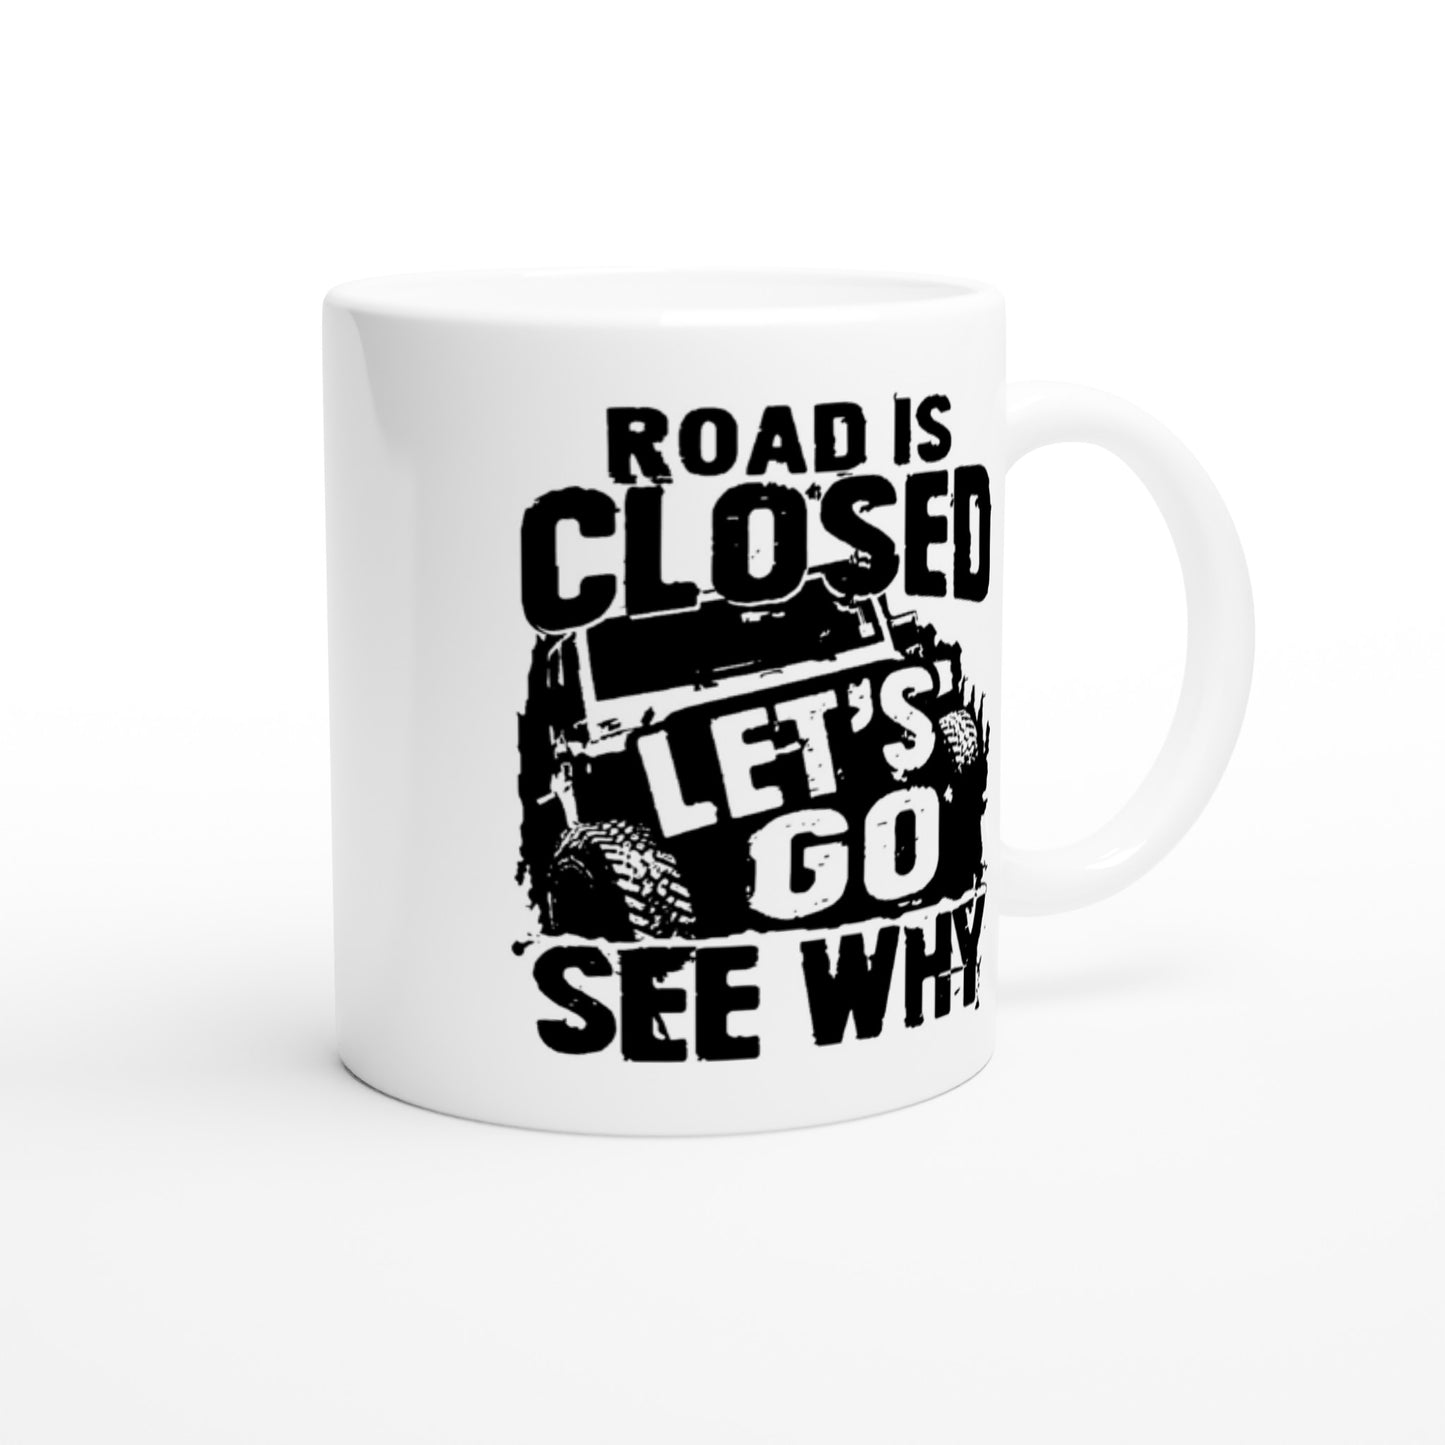 Road is Closed, Let's Go See Why - White 11oz Ceramic Mug - Mister Snarky's